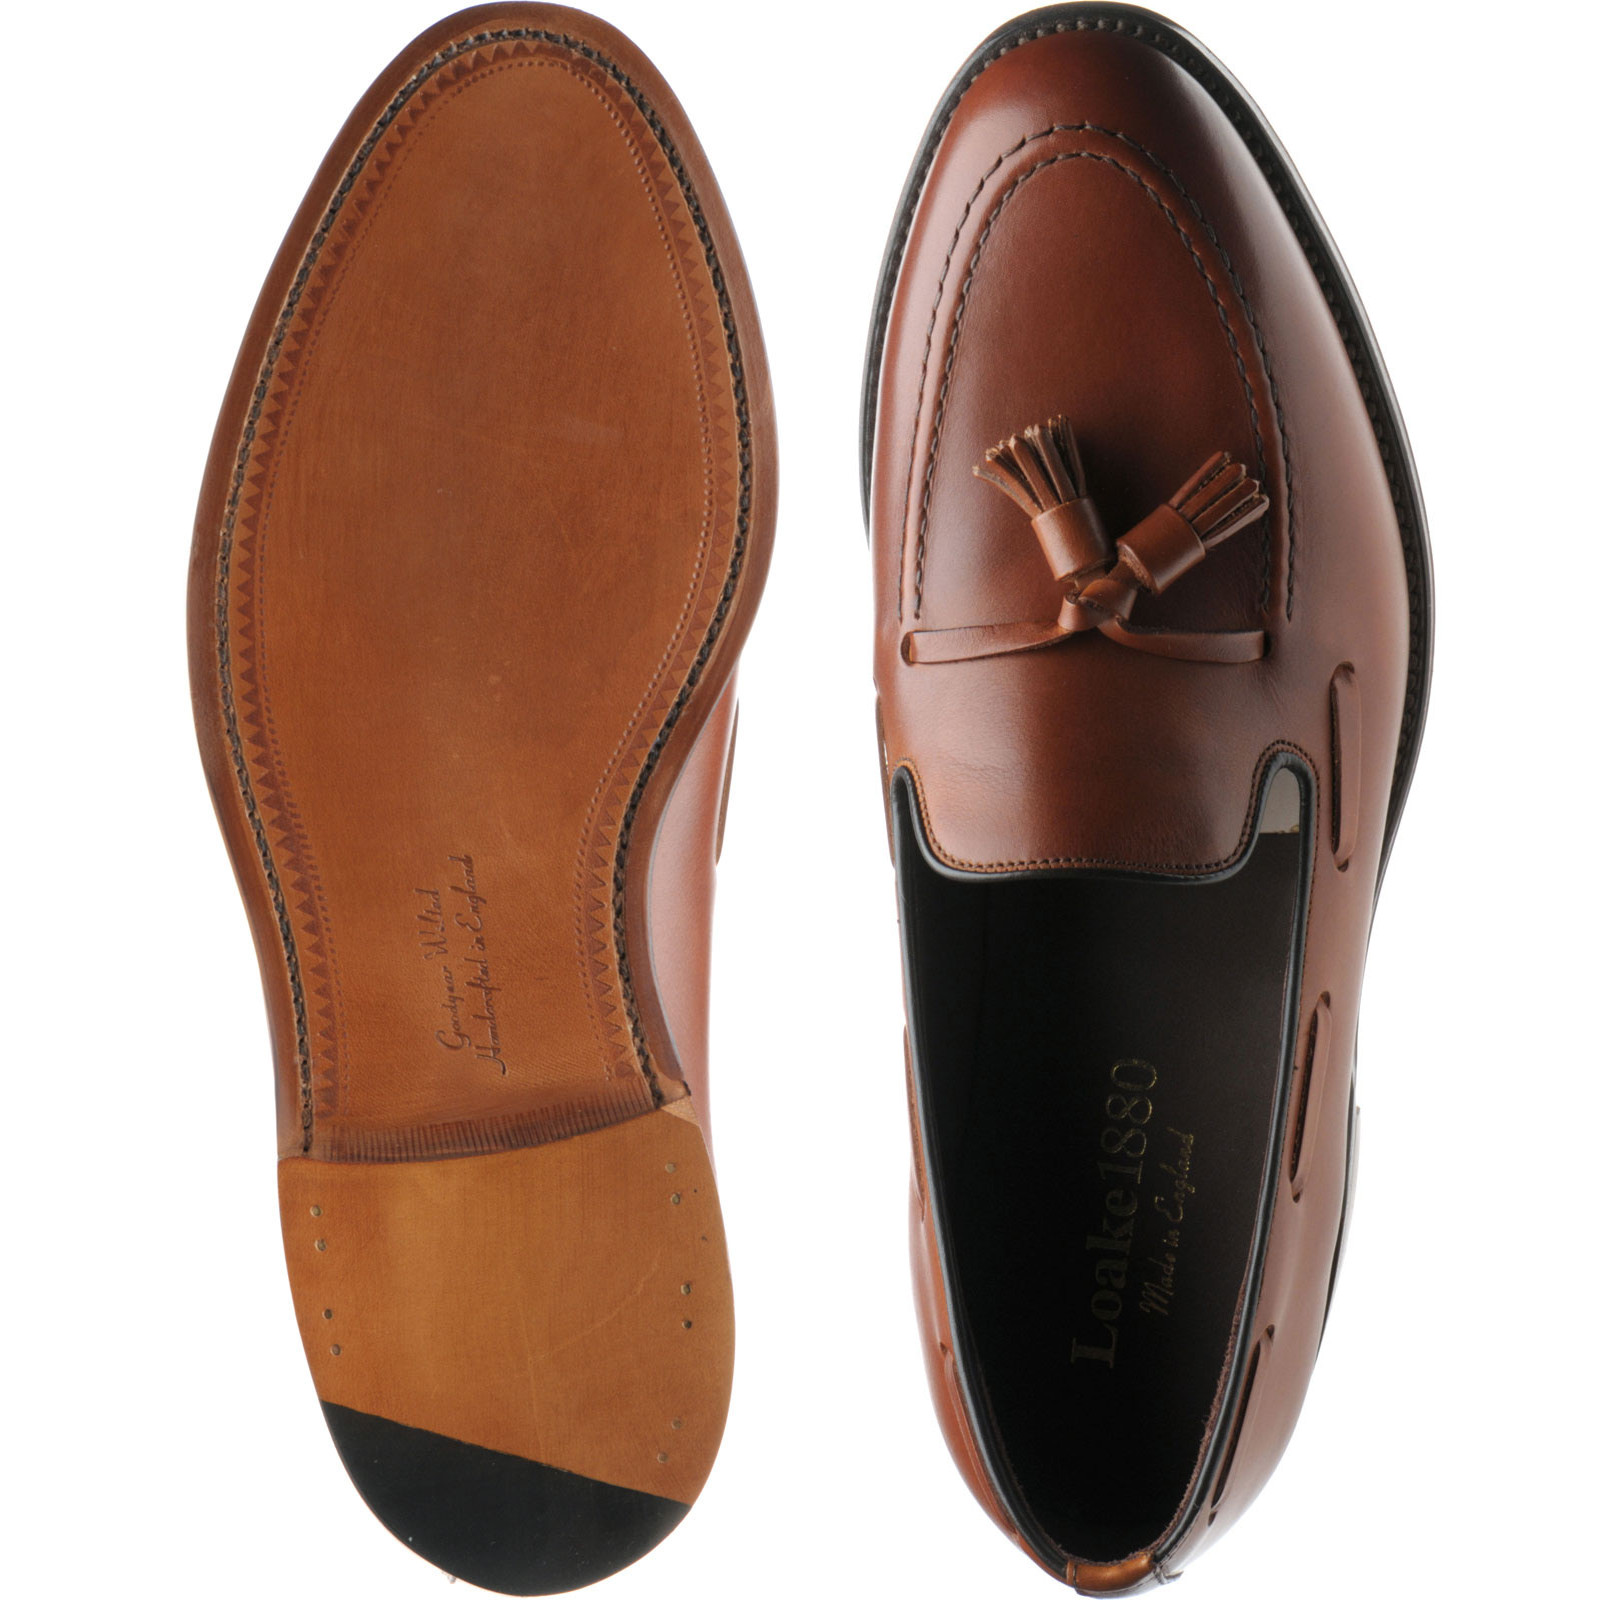 Loake shoes | Loake 1880 | Russell tasselled loafers in Mahogany Calf ...